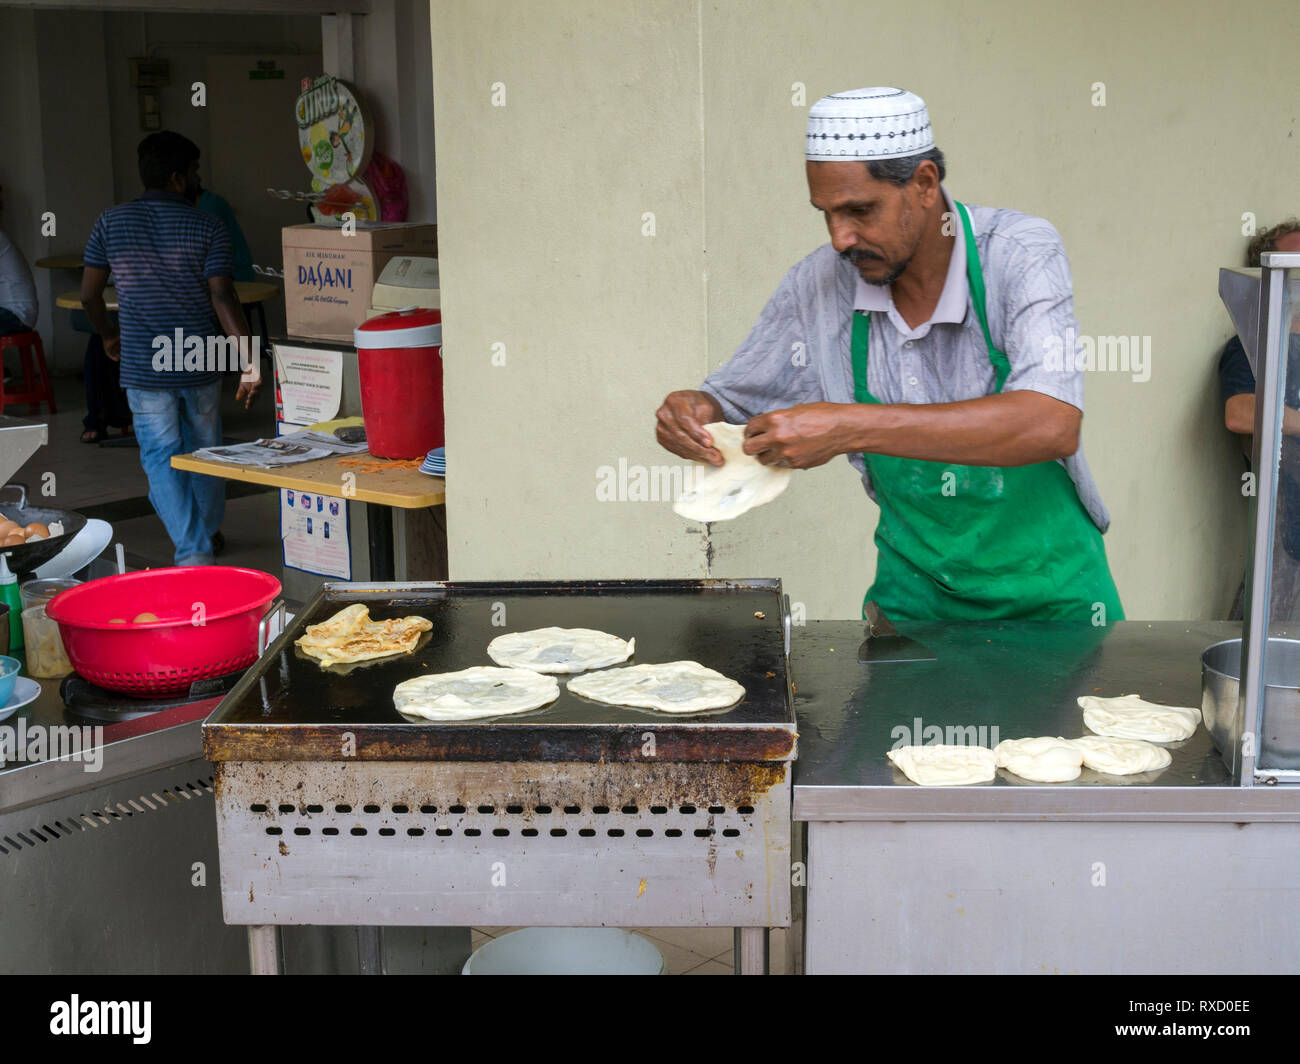 A man making roti cenai on a street corner in George Town, Penang. Roti Cenai is an Indian influenced thin bread cooked on a tava and served with dahl Stock Photo